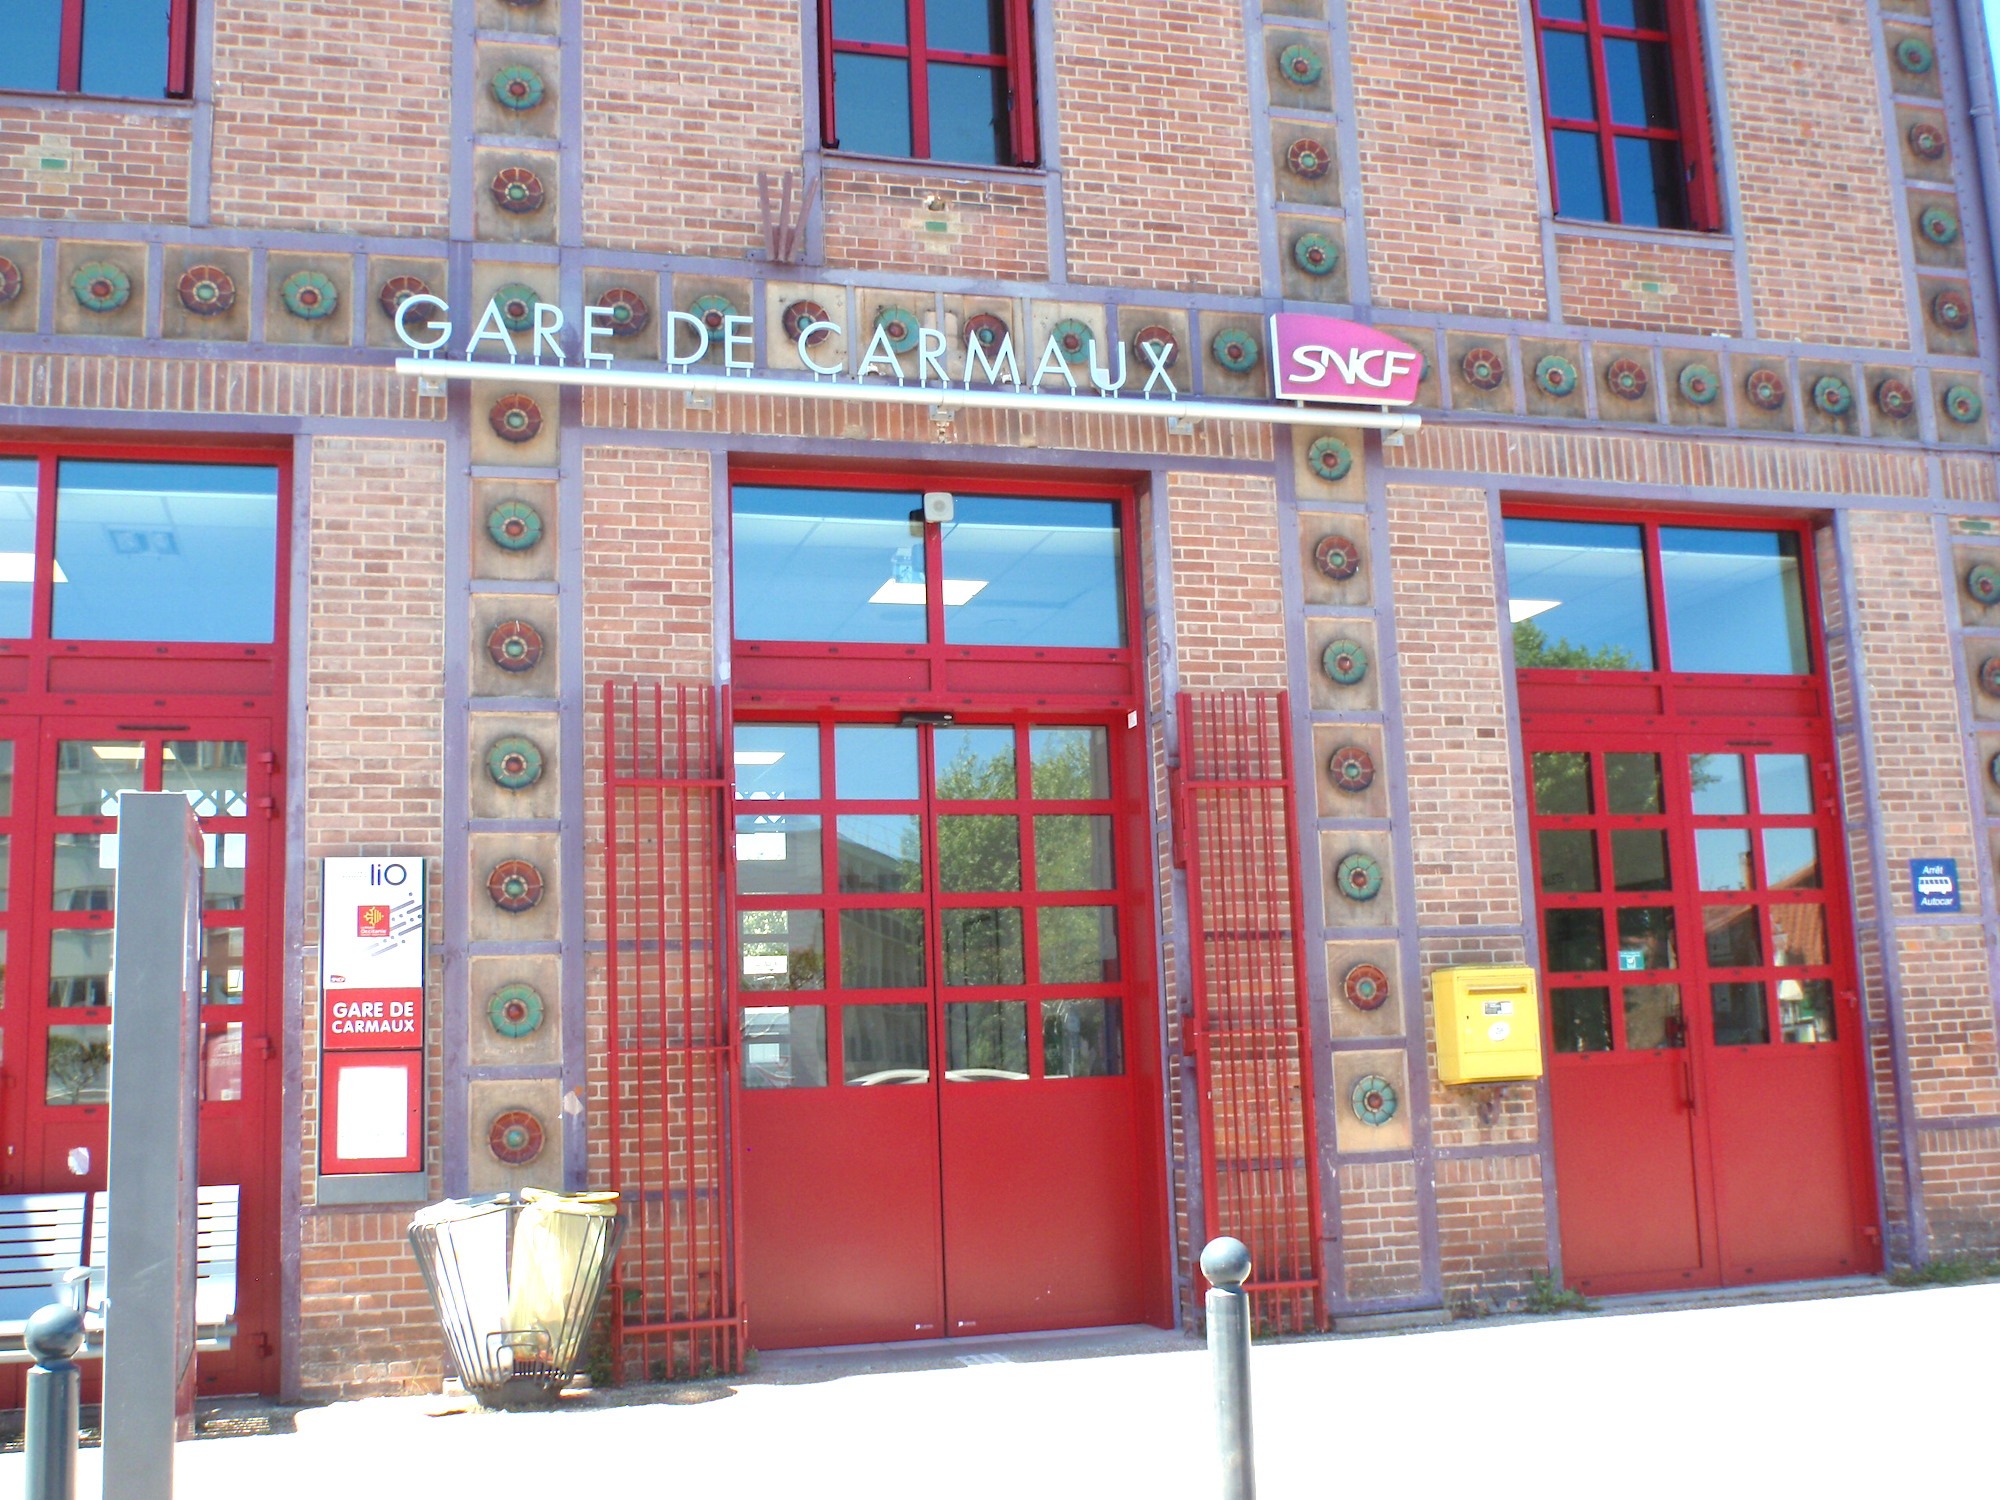 Carmaux gare